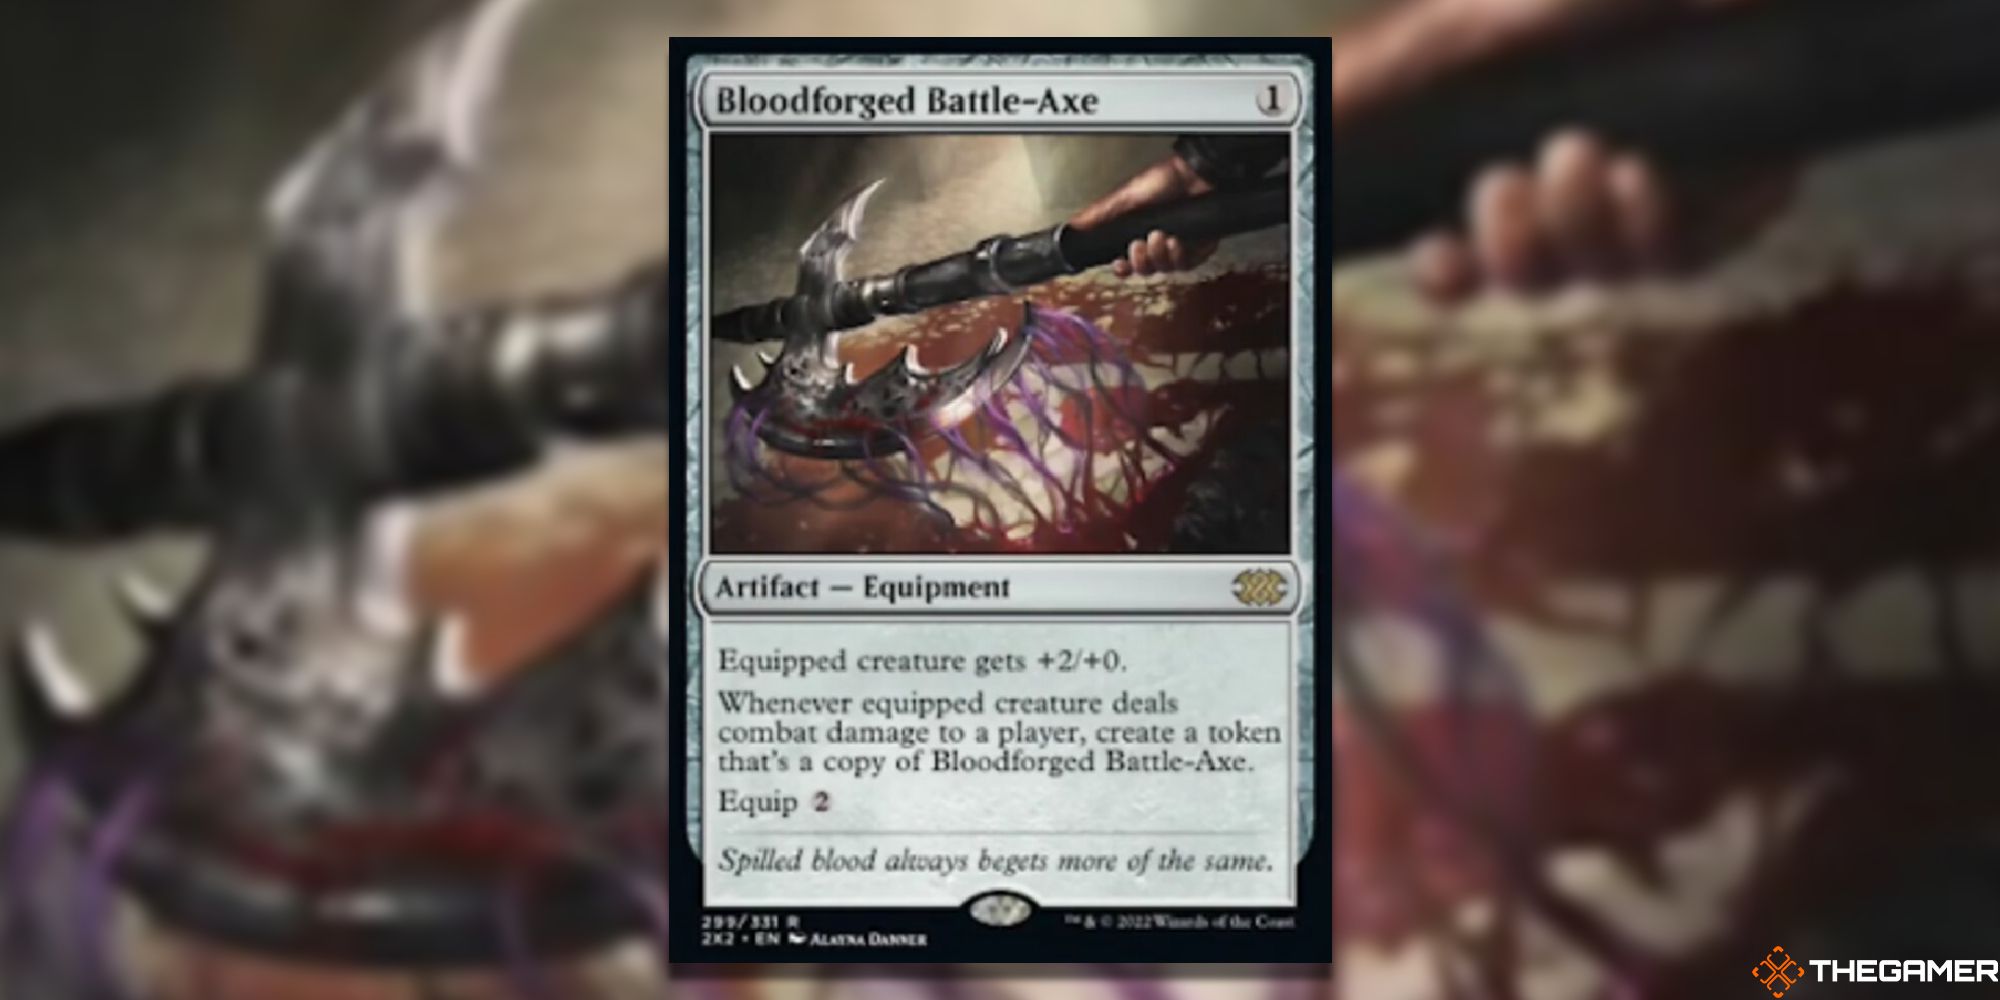 Magic: The Gathering Bloodforged Battle-Axe full card with background